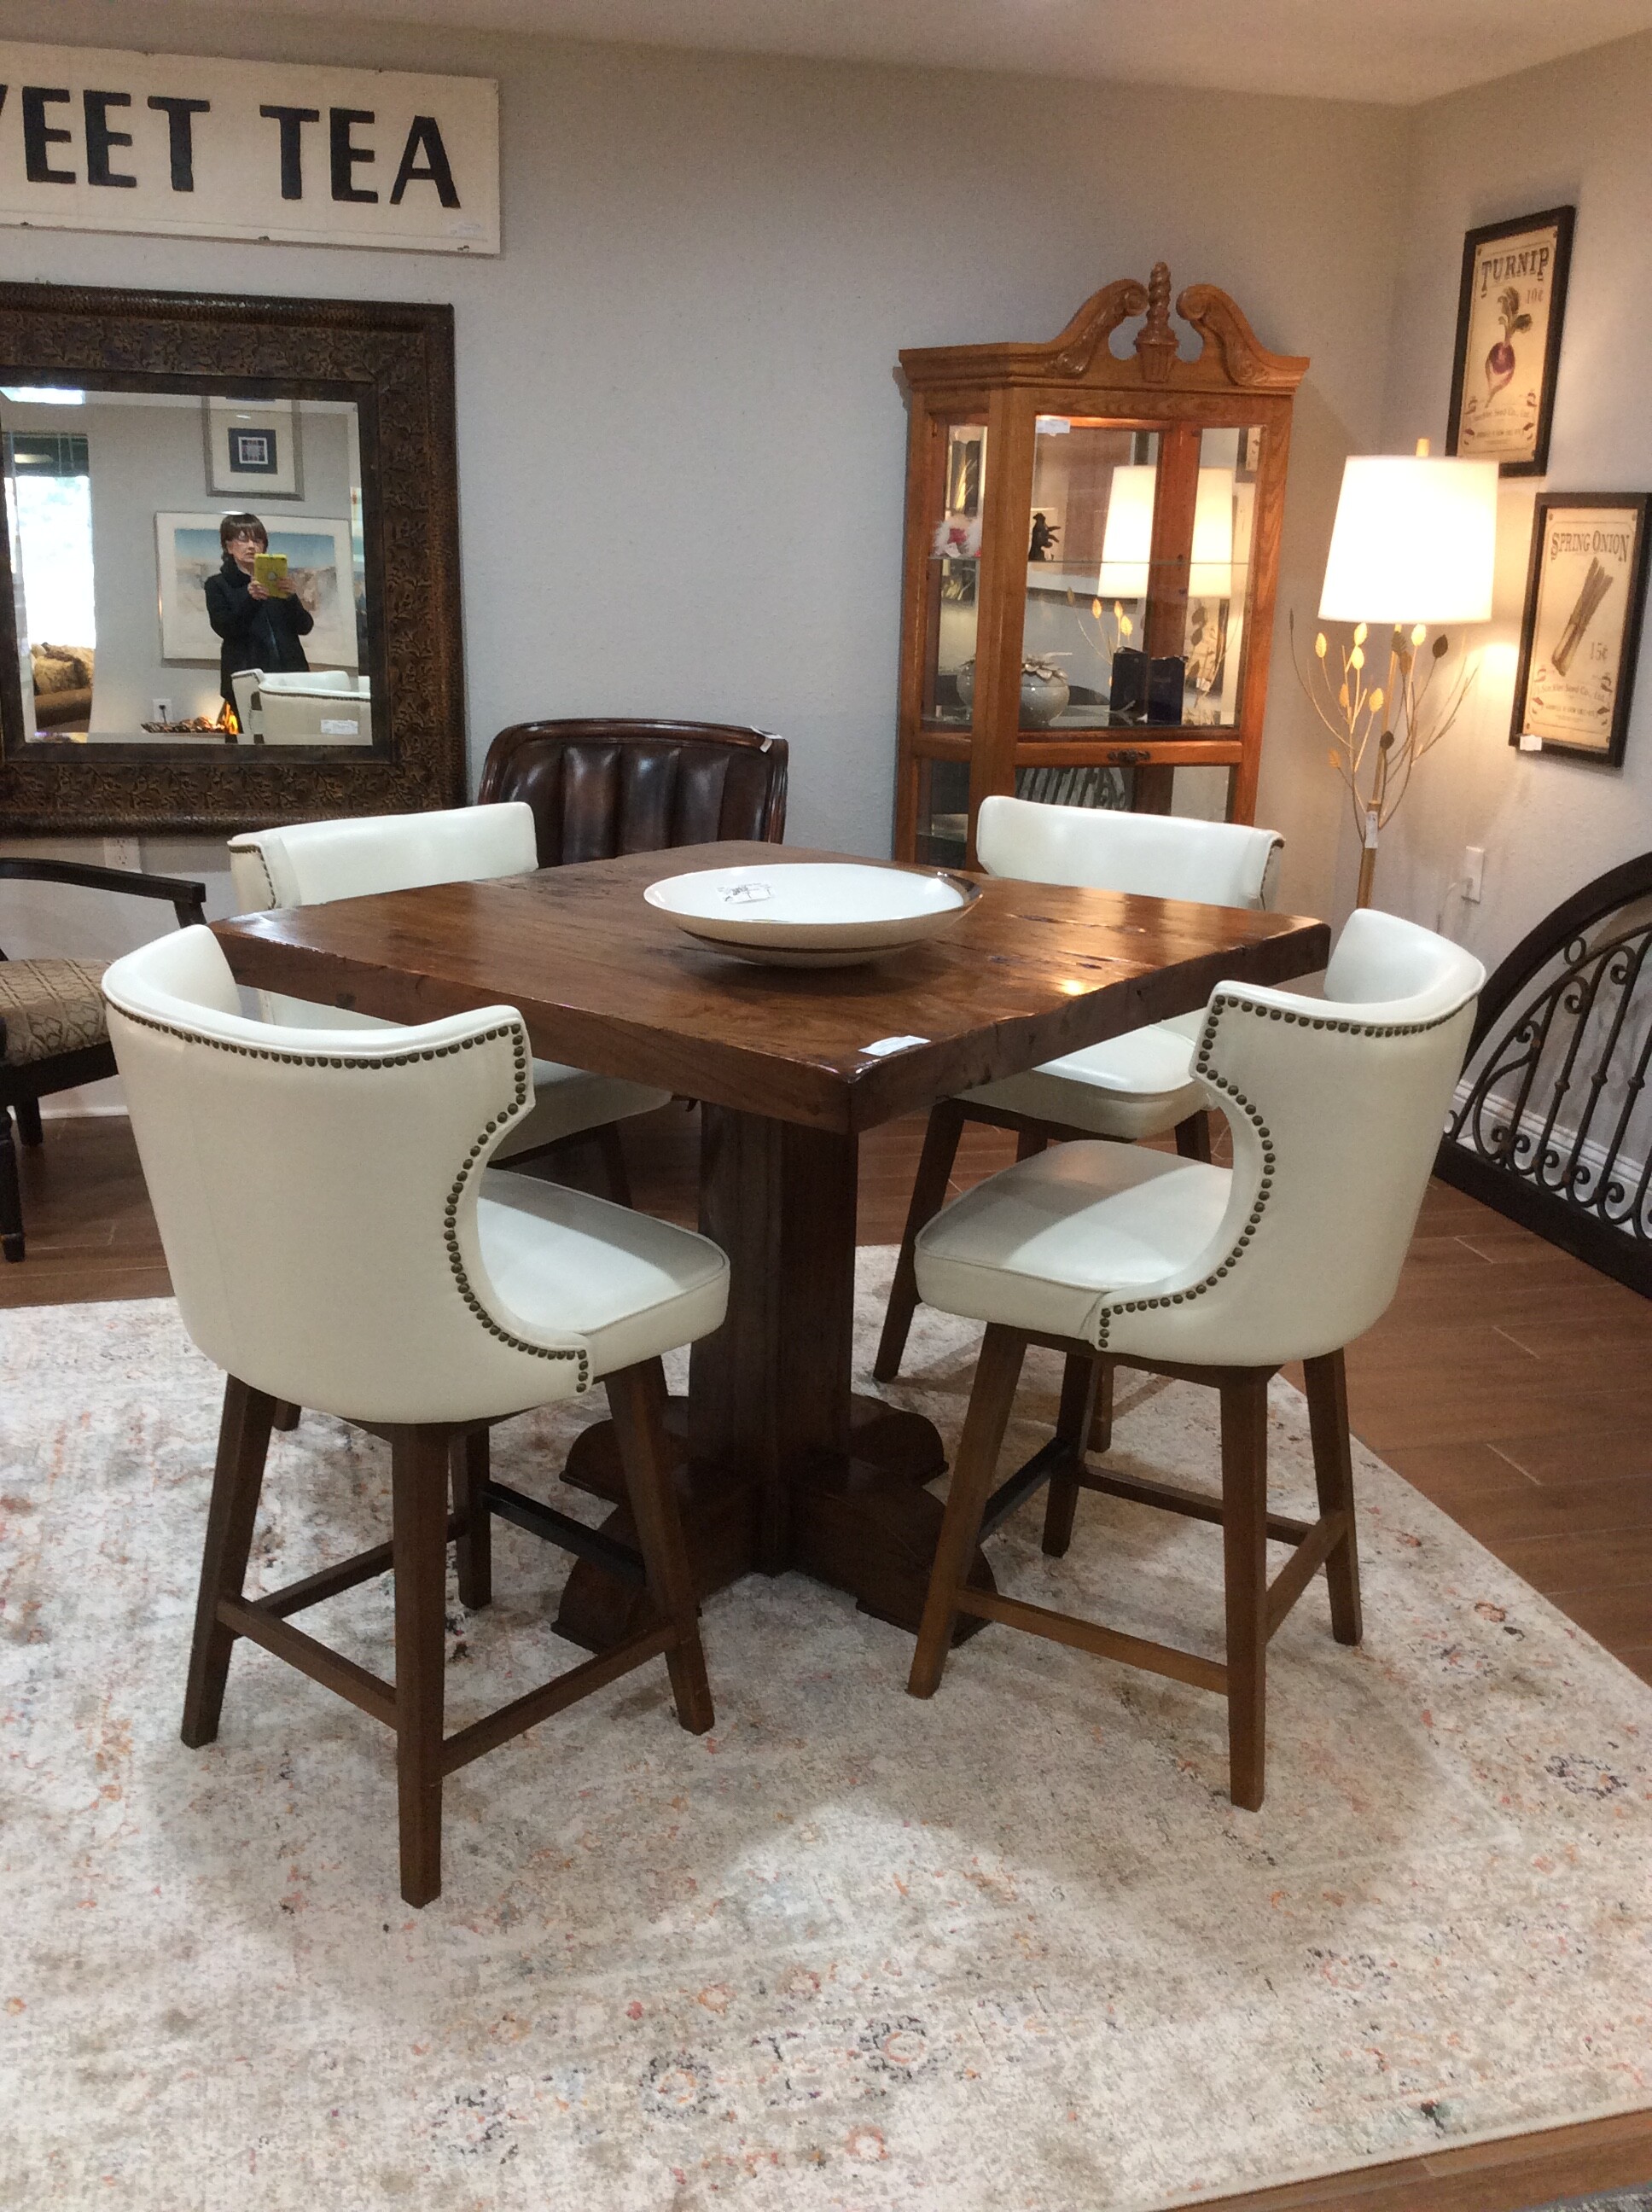 This is a great set! This is a counter-height table with 4 upholstered chairs. The table has a rough-hewn top with a solid, squared off pedestal base. The chairs are more contemporary in style, are upholstered in off-white and have a nailhead trim.